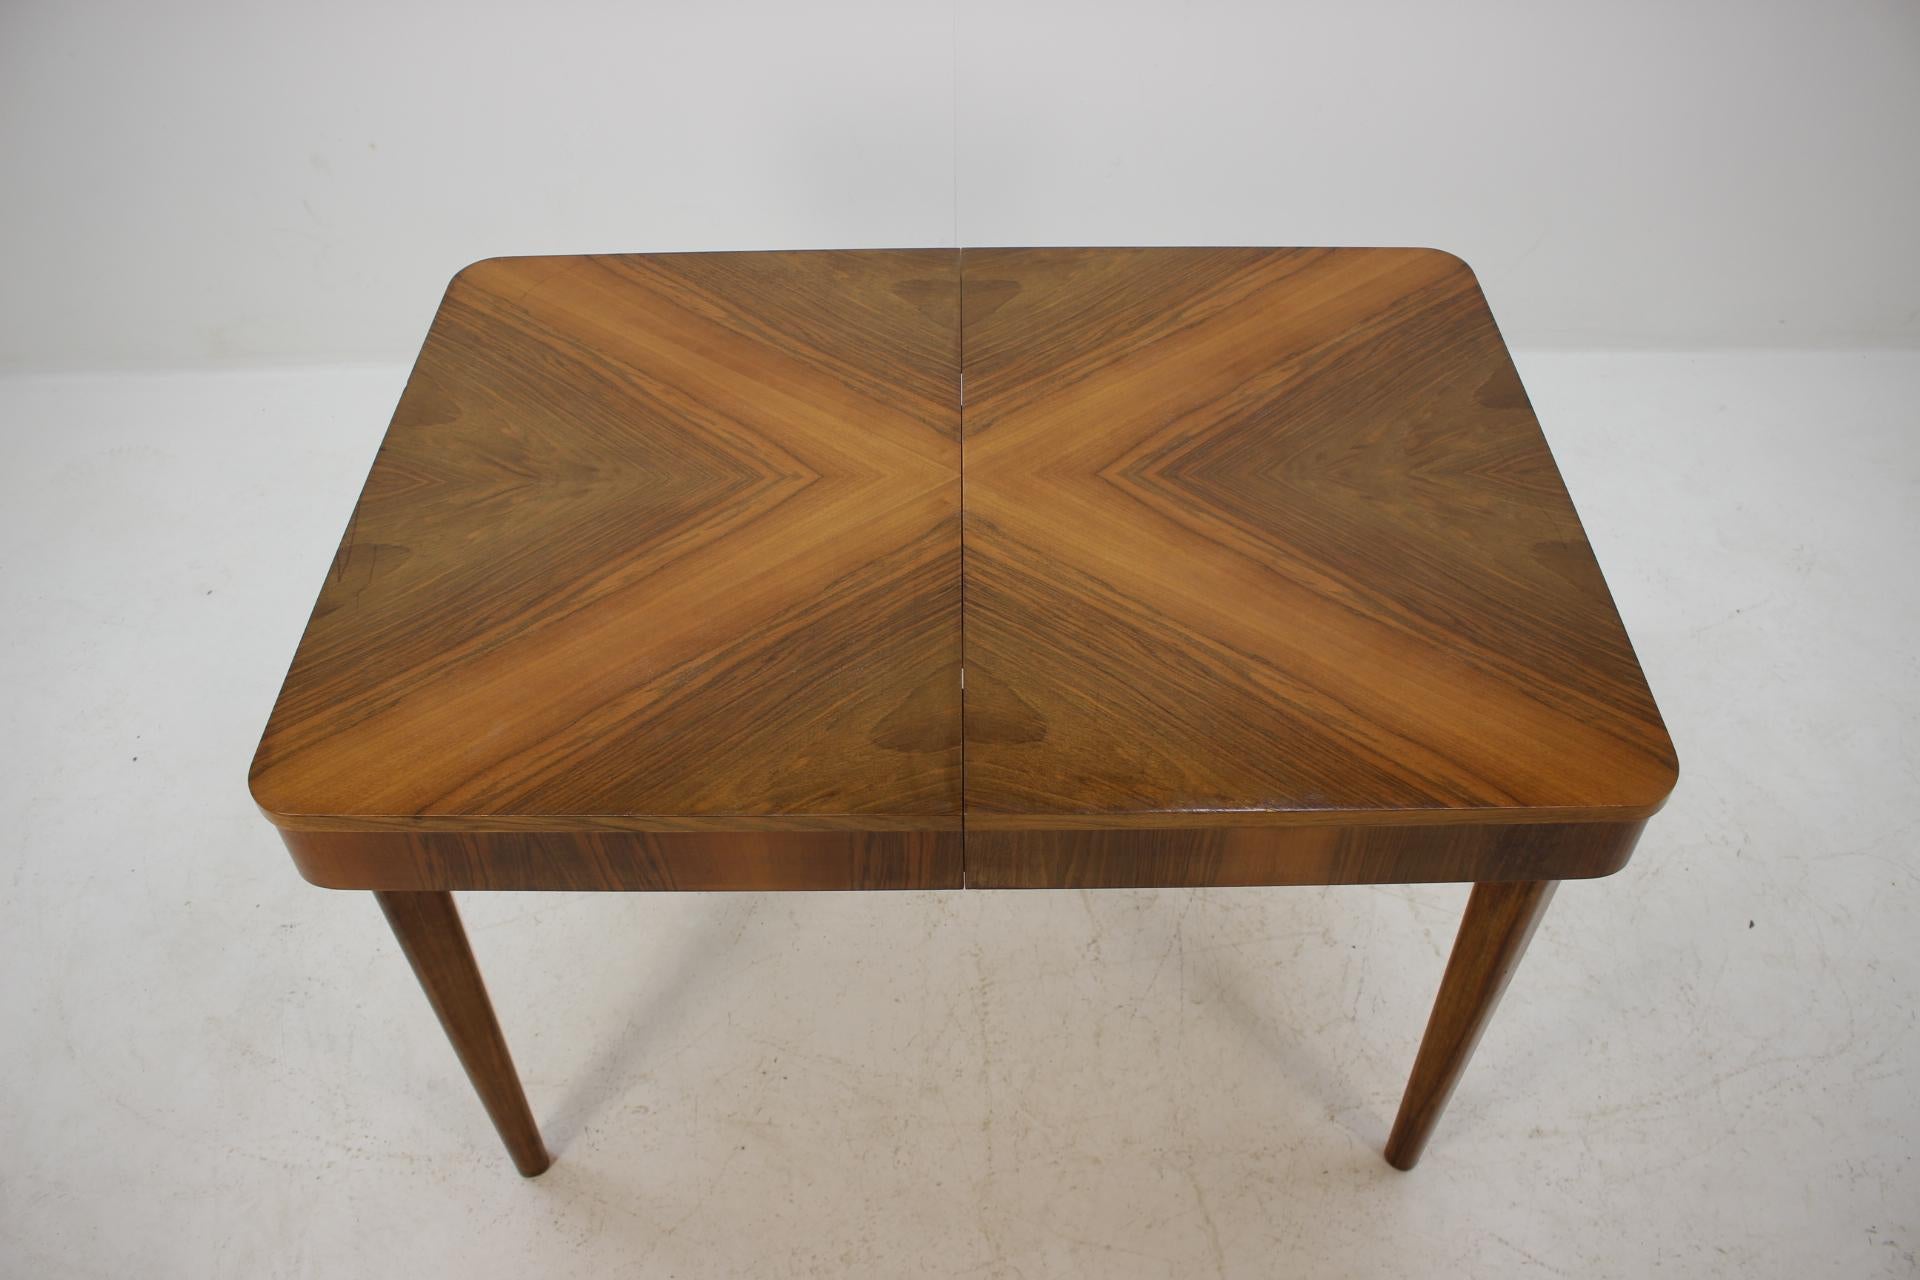 Very good original condition with some sign of use. Original fabric upholstery. Extendable dining table with some scrathes in the lacquer layer. Walnut veneer. The table dimensions are: H: 76 cm W: 120 - 190 cm D: 85 cm